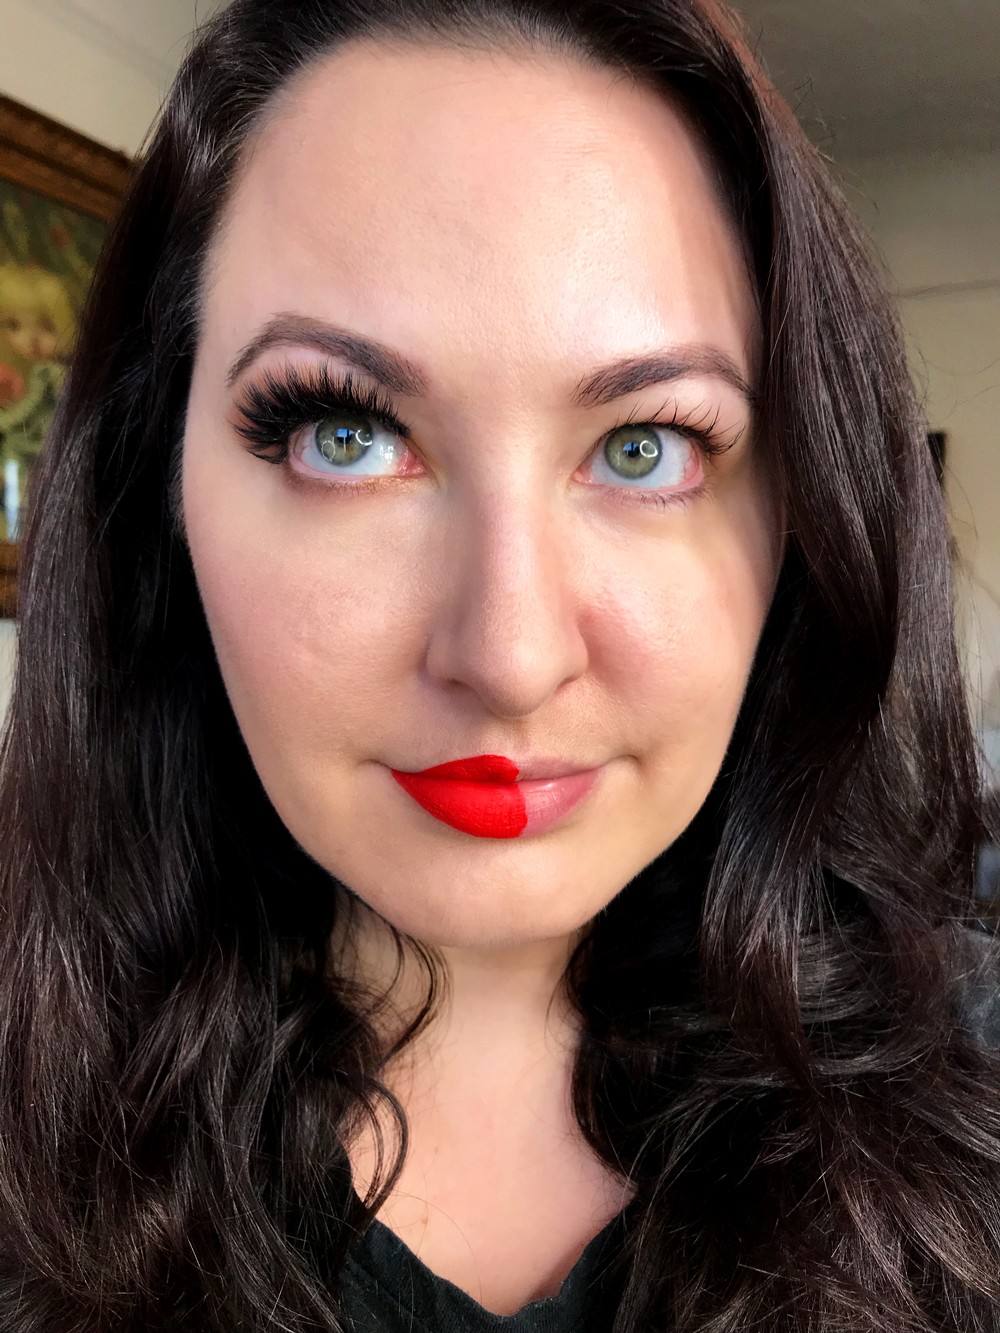 Half Glam Face with Sheree Cosmetics Lashes Lipstick and Eyeshadow - Sheree Cosmetics Review and Giveaway by popular Los Angeles cruelty free beauty blogger My Beauty Bunny